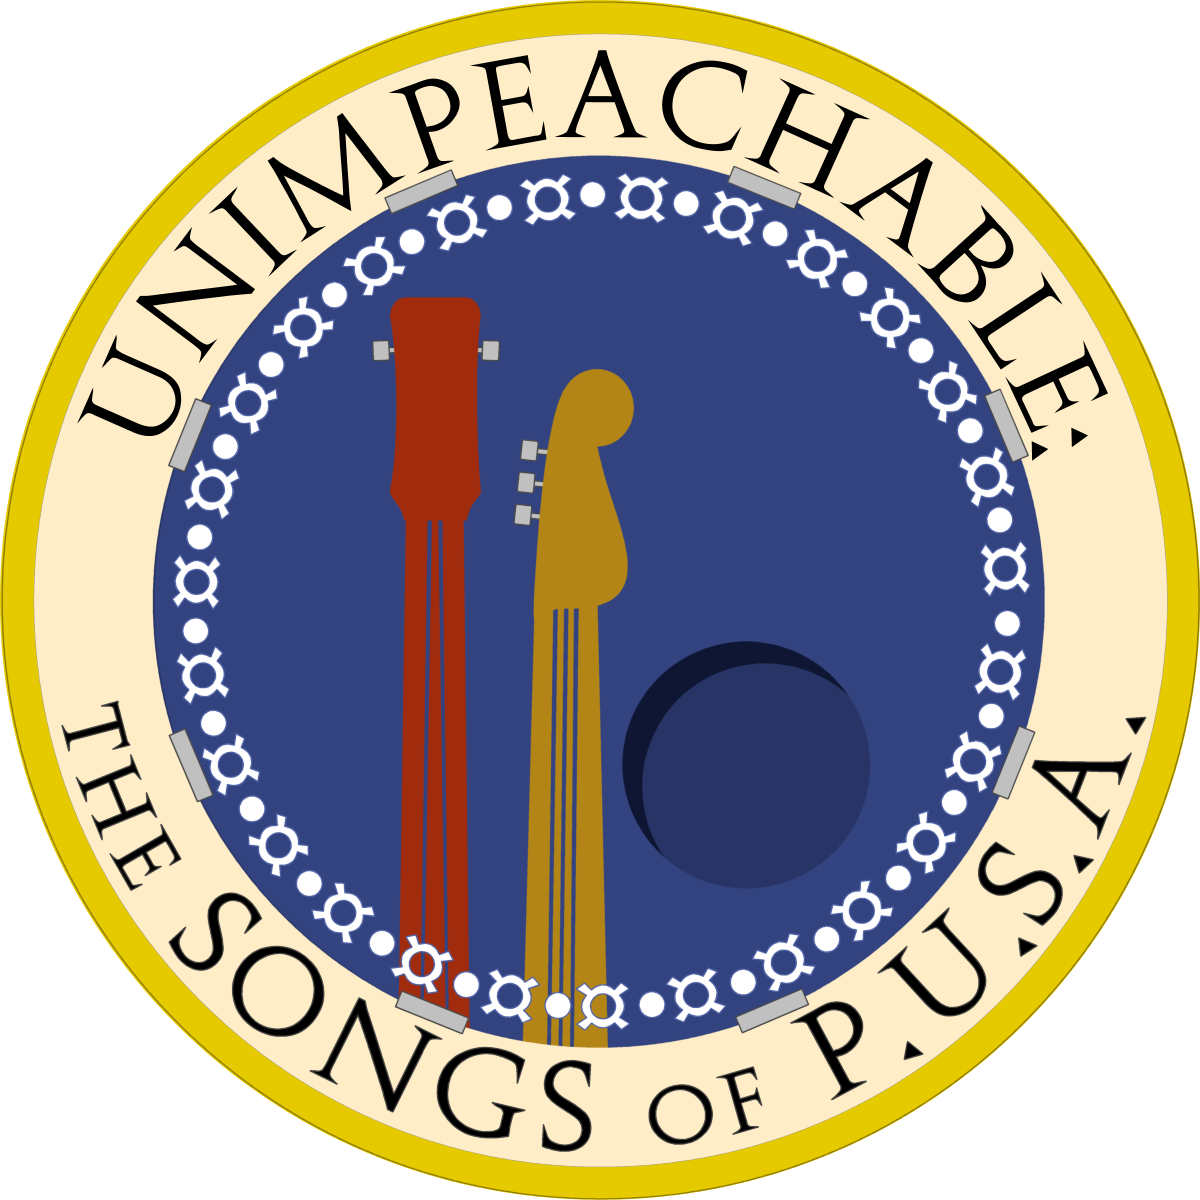 Unimpeachable: The Songs of the Presidents of the United States of America – Episode 1 – with Chris Ballew